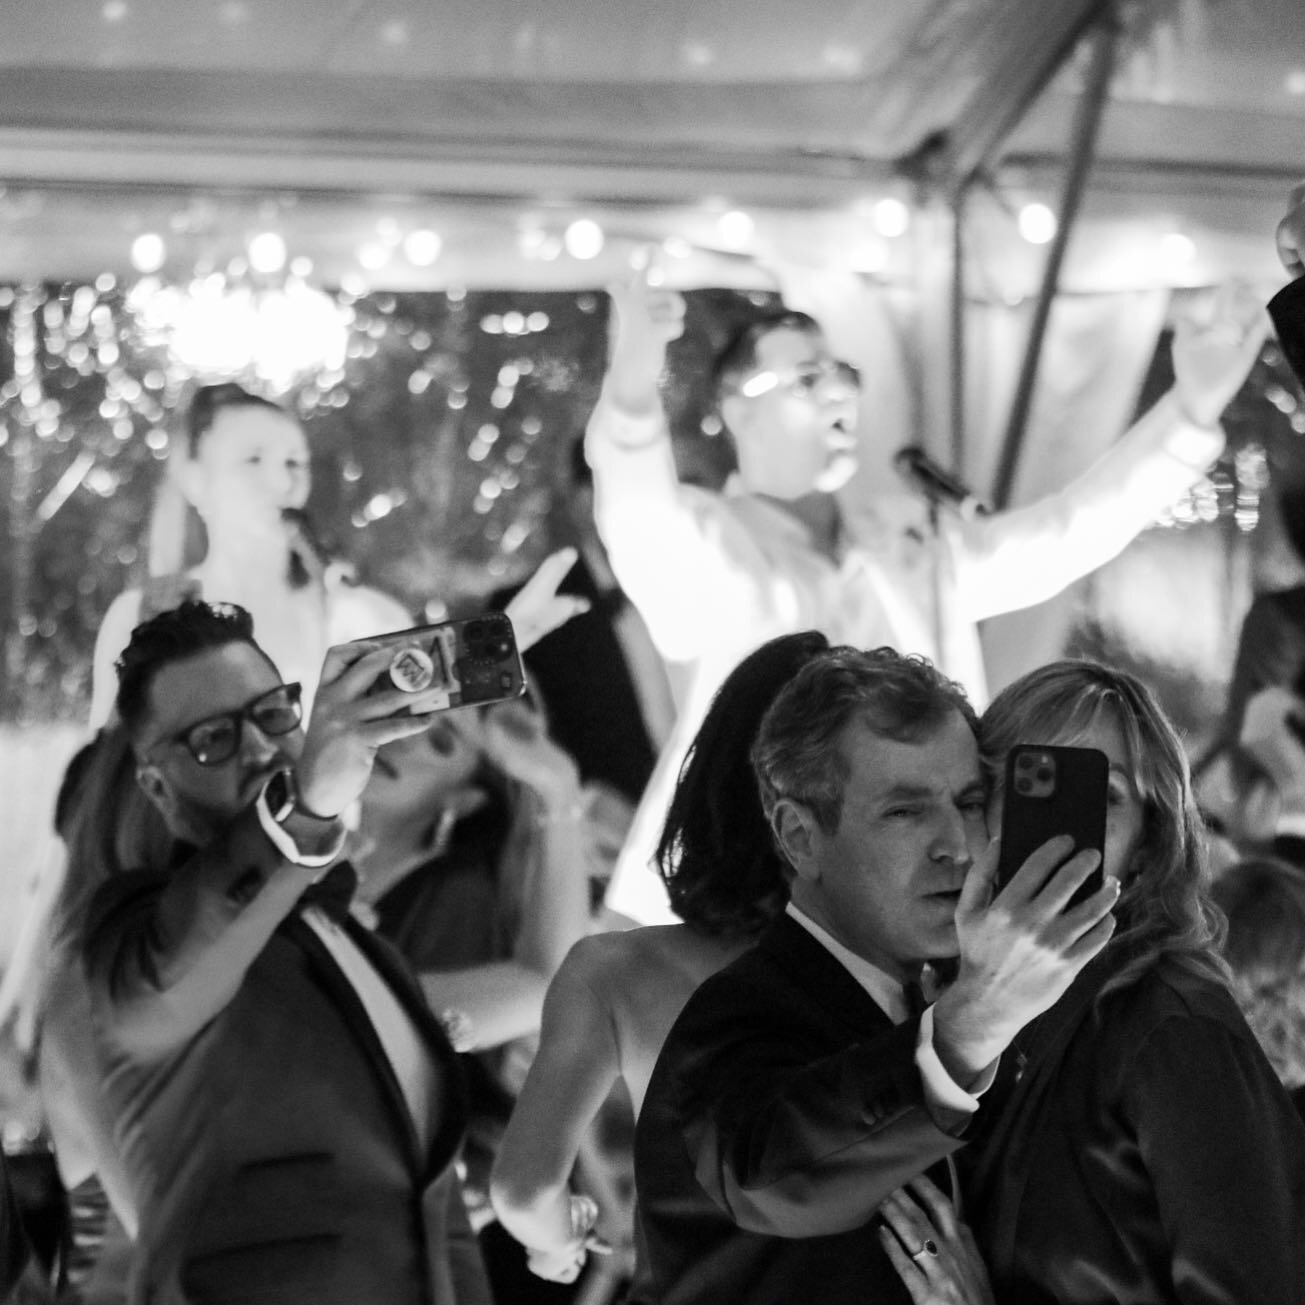 But first, let me take a selfie 📸 
.
.
Don&rsquo;t forget to tag us!! We love seeing your smiling faces on the dance floor 🪩 🎶 
.
.
.
#weparty
#bookus
#eastcoast 
#entertainment 
#weddings
#events